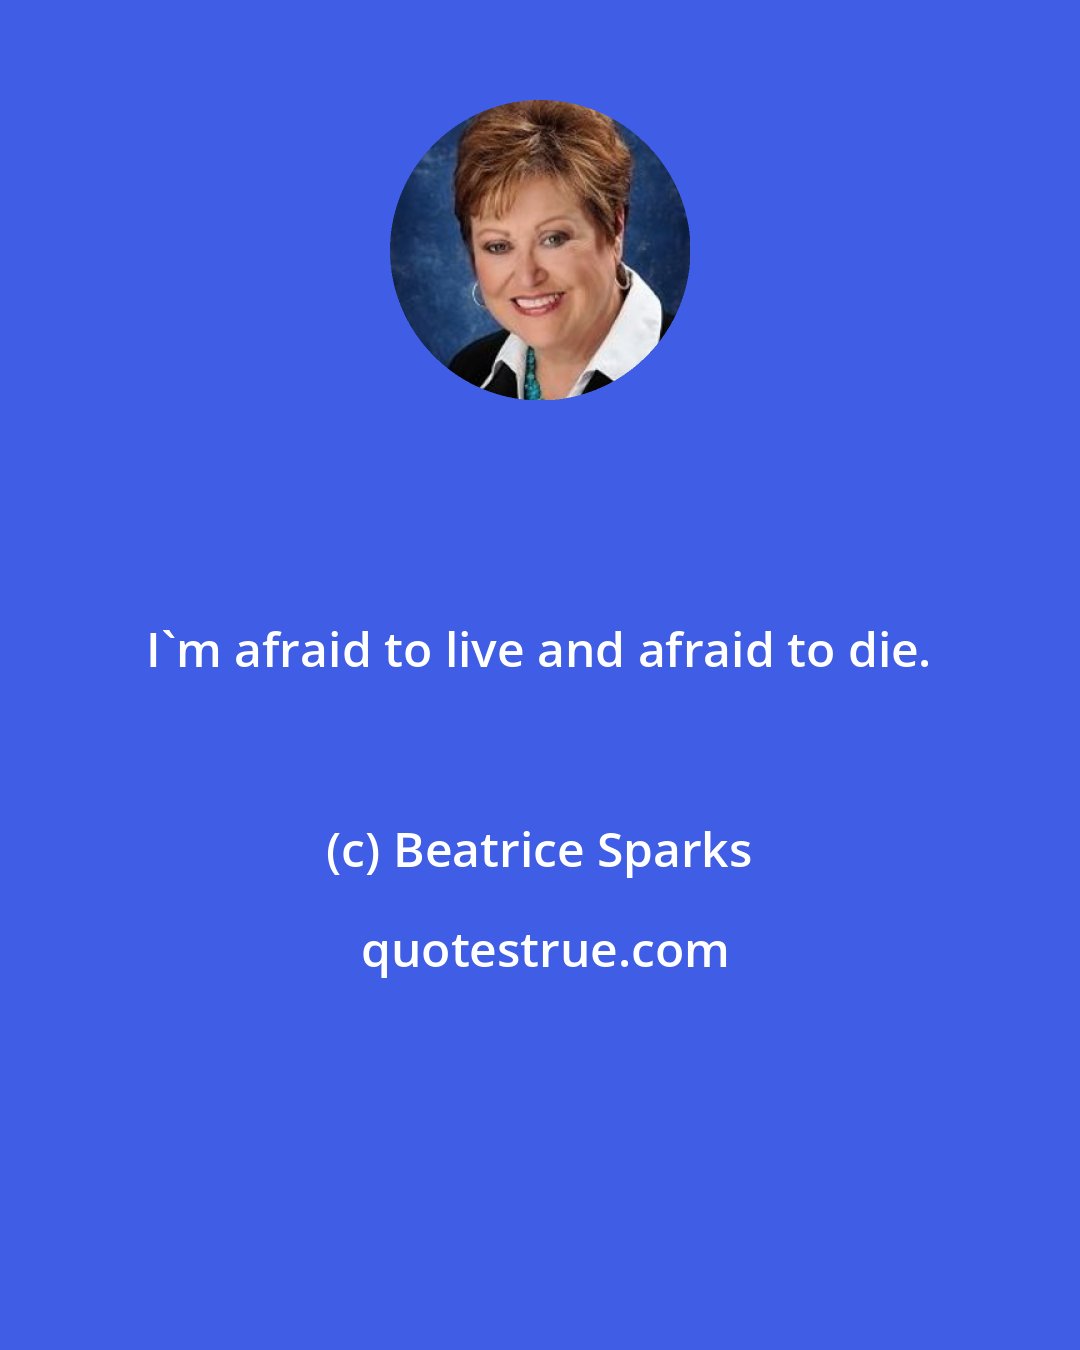 Beatrice Sparks: I'm afraid to live and afraid to die.